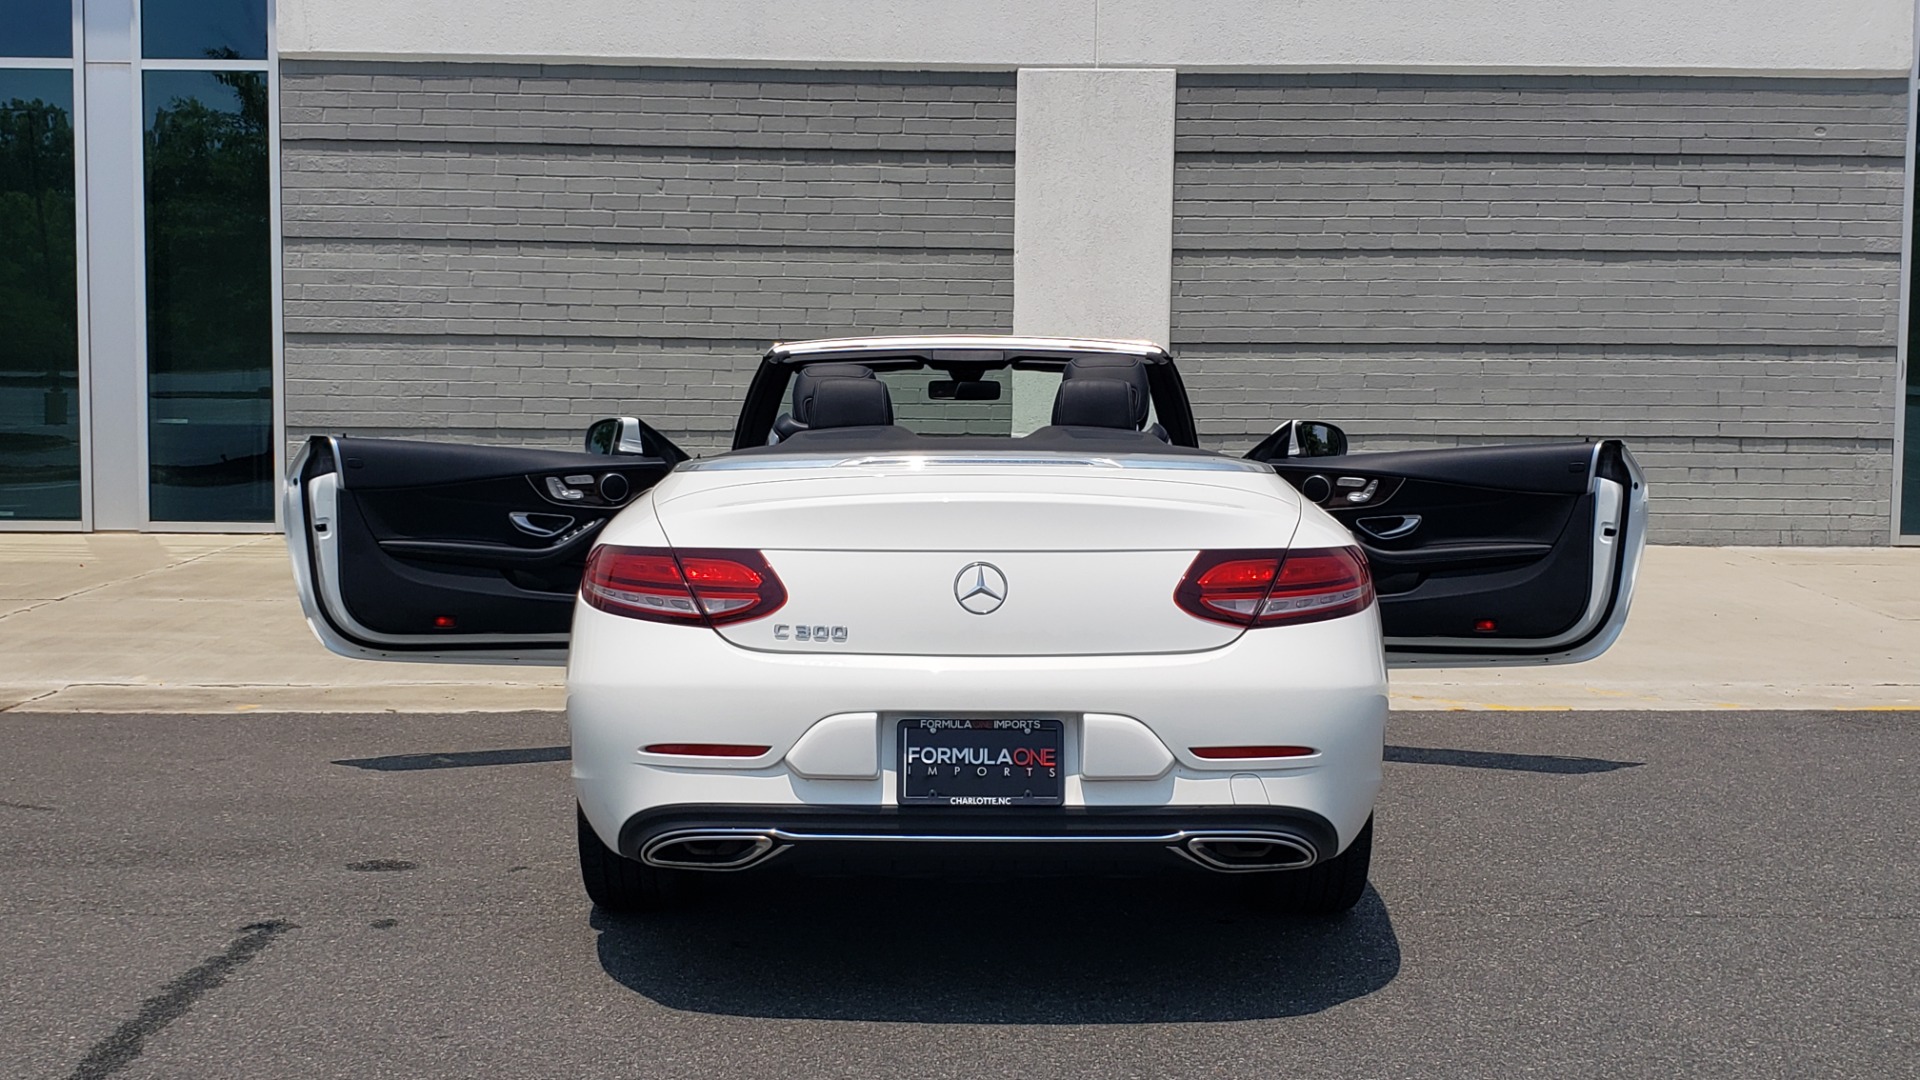 Used 2019 Mercedes-Benz C-CLASS C 300 CABRIOLET 2.0L / AUTO / NAV / HD RADIO / REARVIEW for sale Sold at Formula Imports in Charlotte NC 28227 30